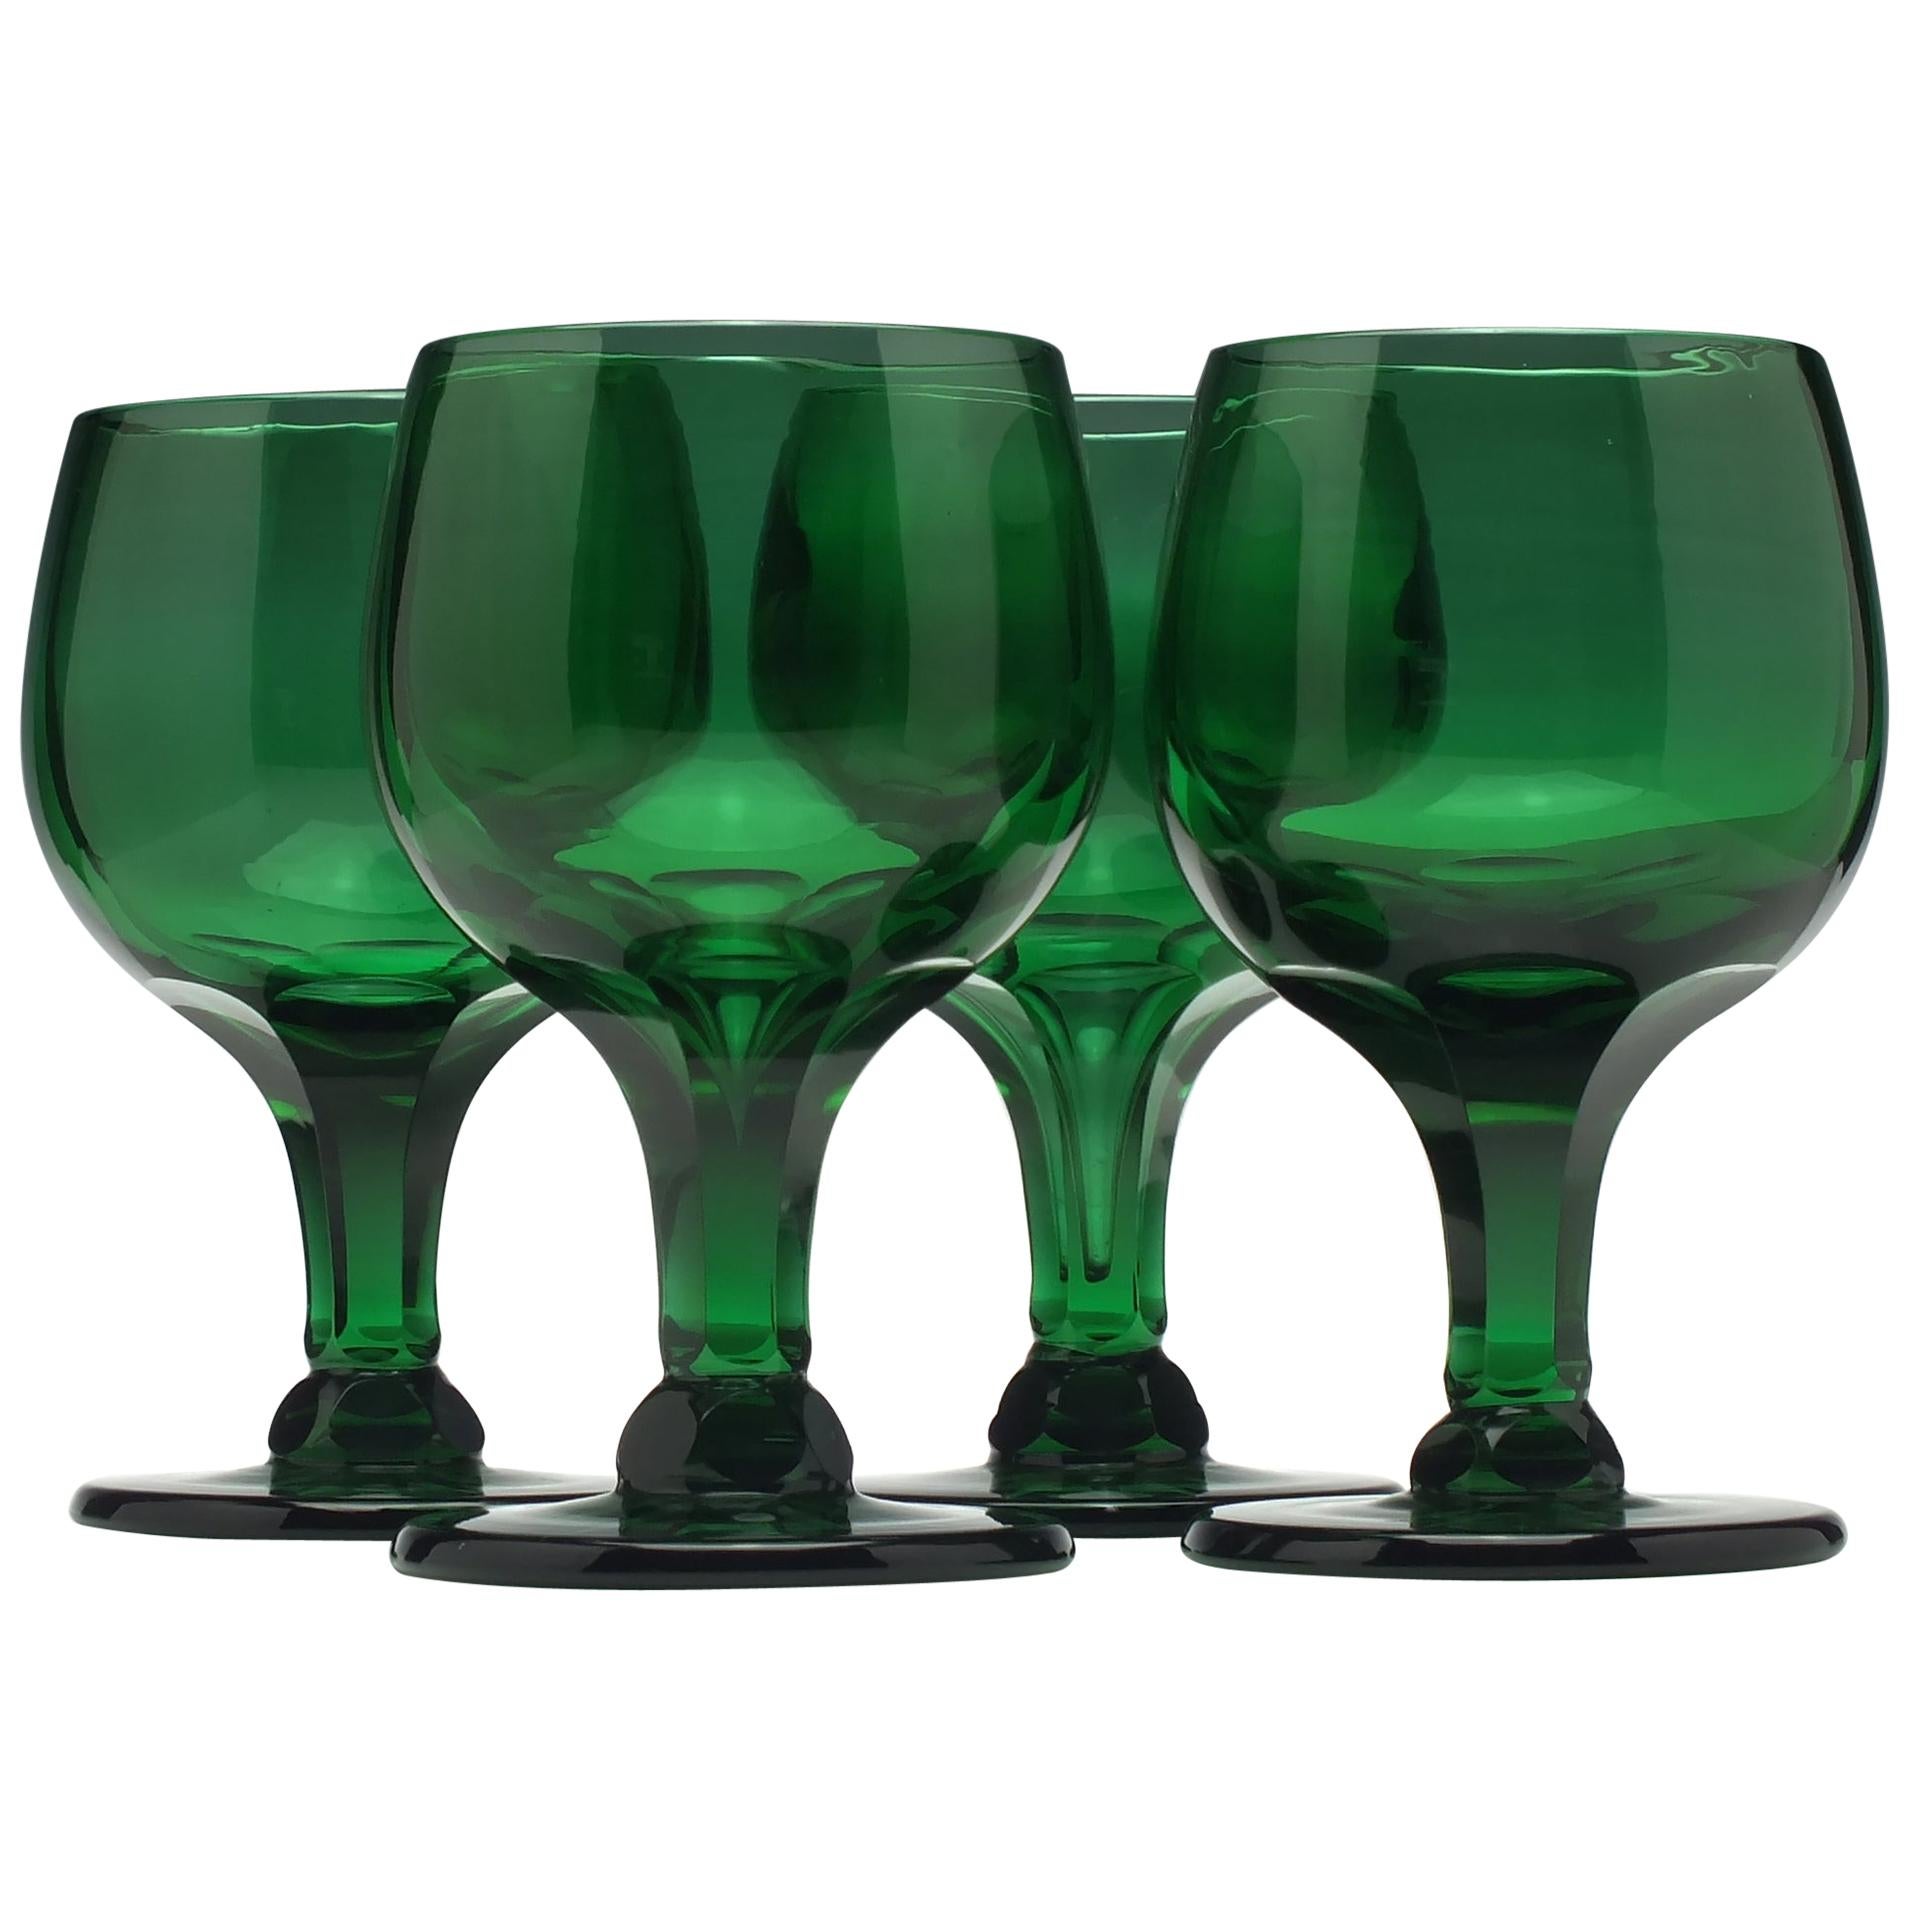 Set of Four Green Glass Wine Goblets, circa 1900 For Sale